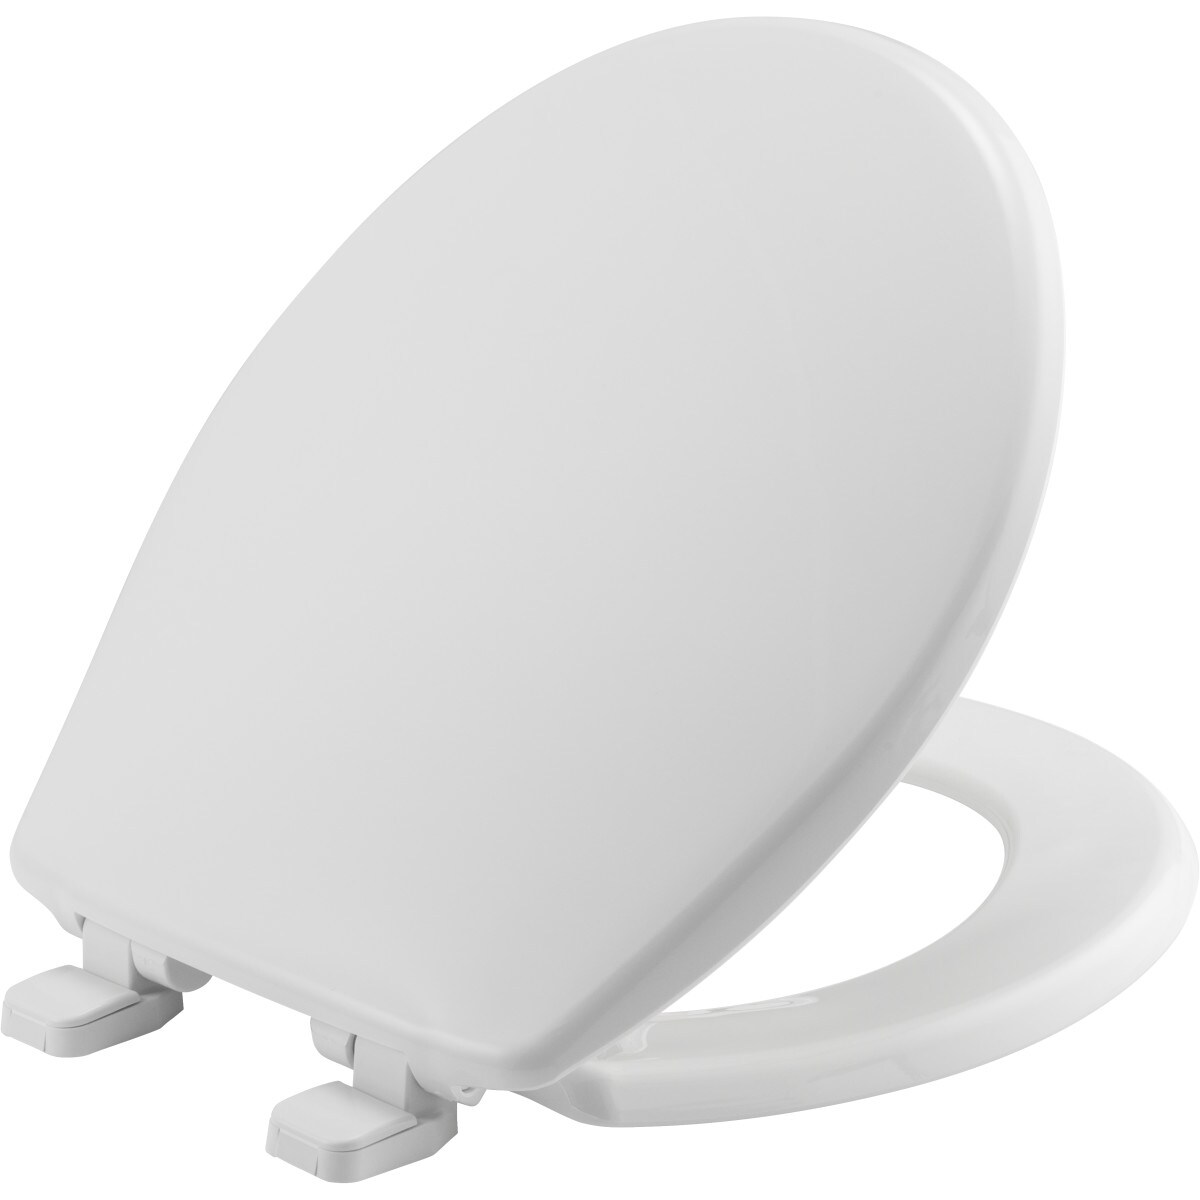 Mansfield Elongated Closed Front White Plastic Standard Toilet Seat MP1600-001 